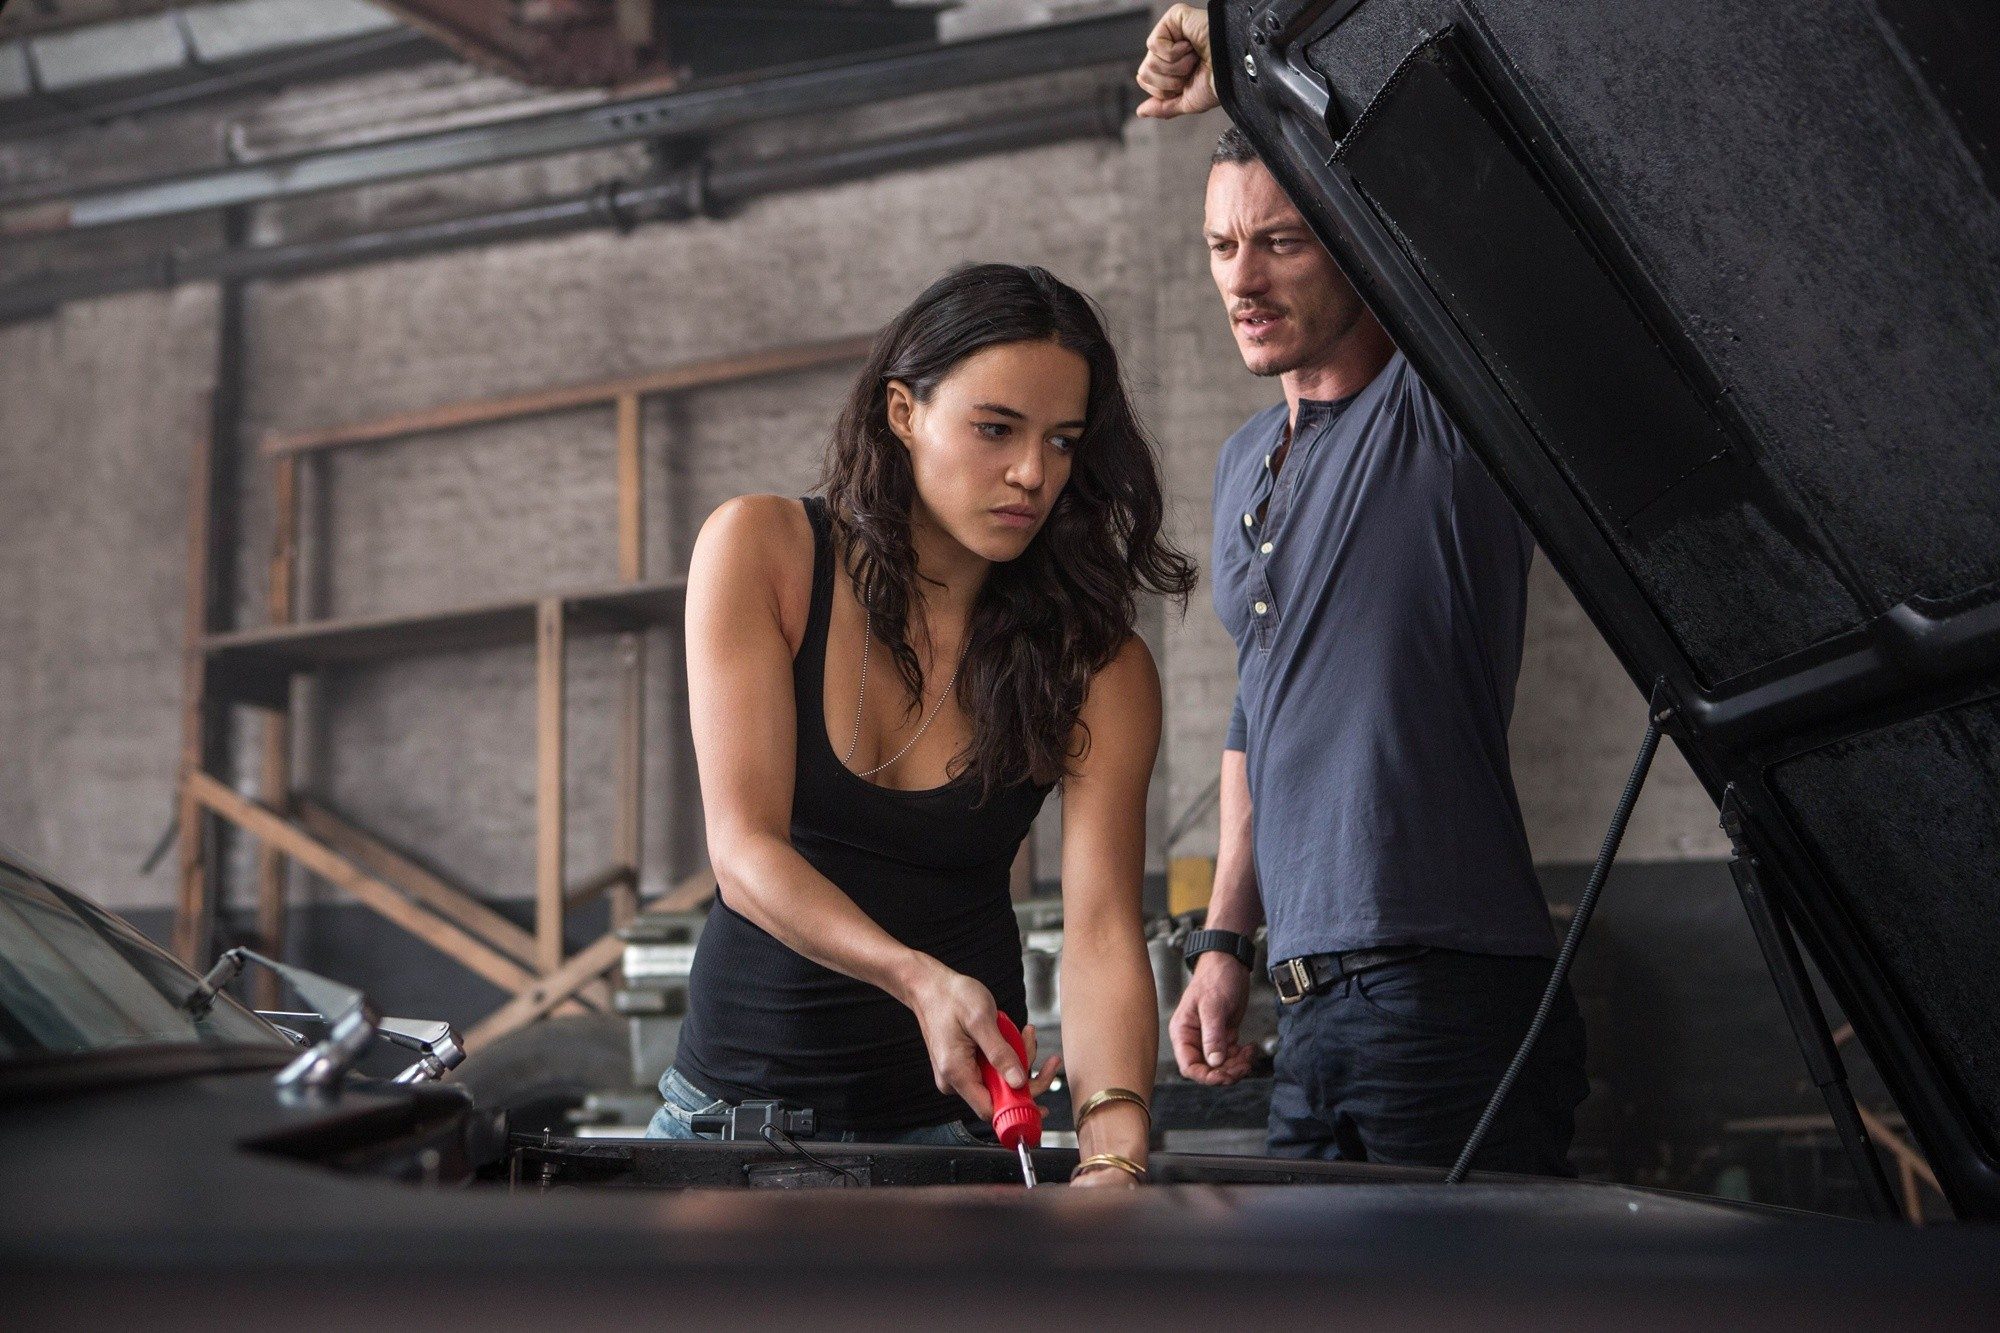 Michelle Rodriguez stars as Letty and Luke Evans stars as Owen Shaw in Universal Pictures' Fast and Furious 6 (2013)